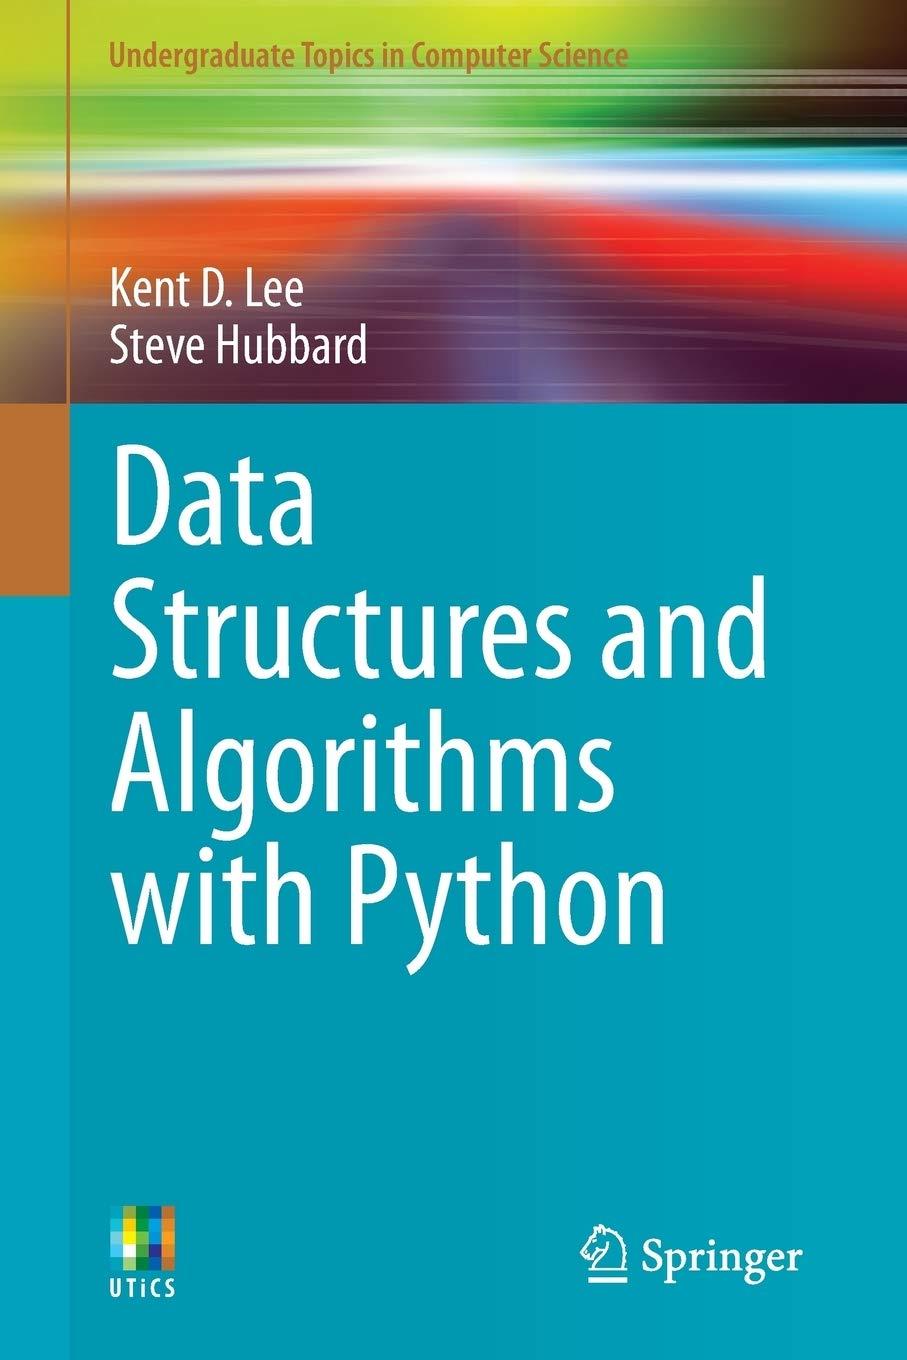 data structures and algorithms with python 1st edition kent d. lee, steve hubbard 3319130714, 9783319130712